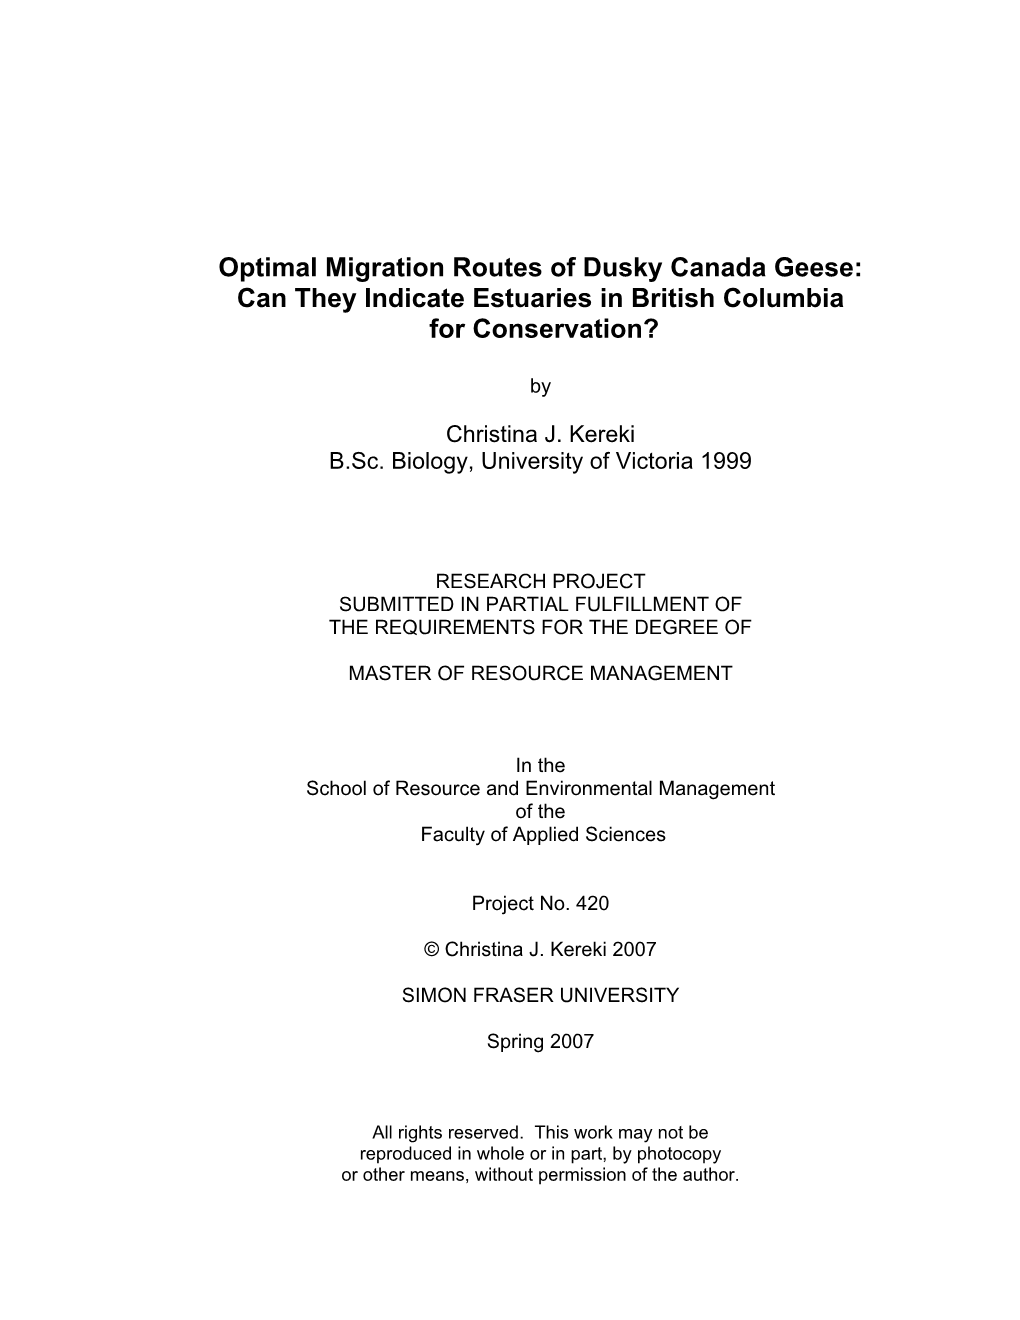 Optimal Migration Routes of Dusky Canada Geese: Can They Indicate Estuaries in British Columbia for Conservation?